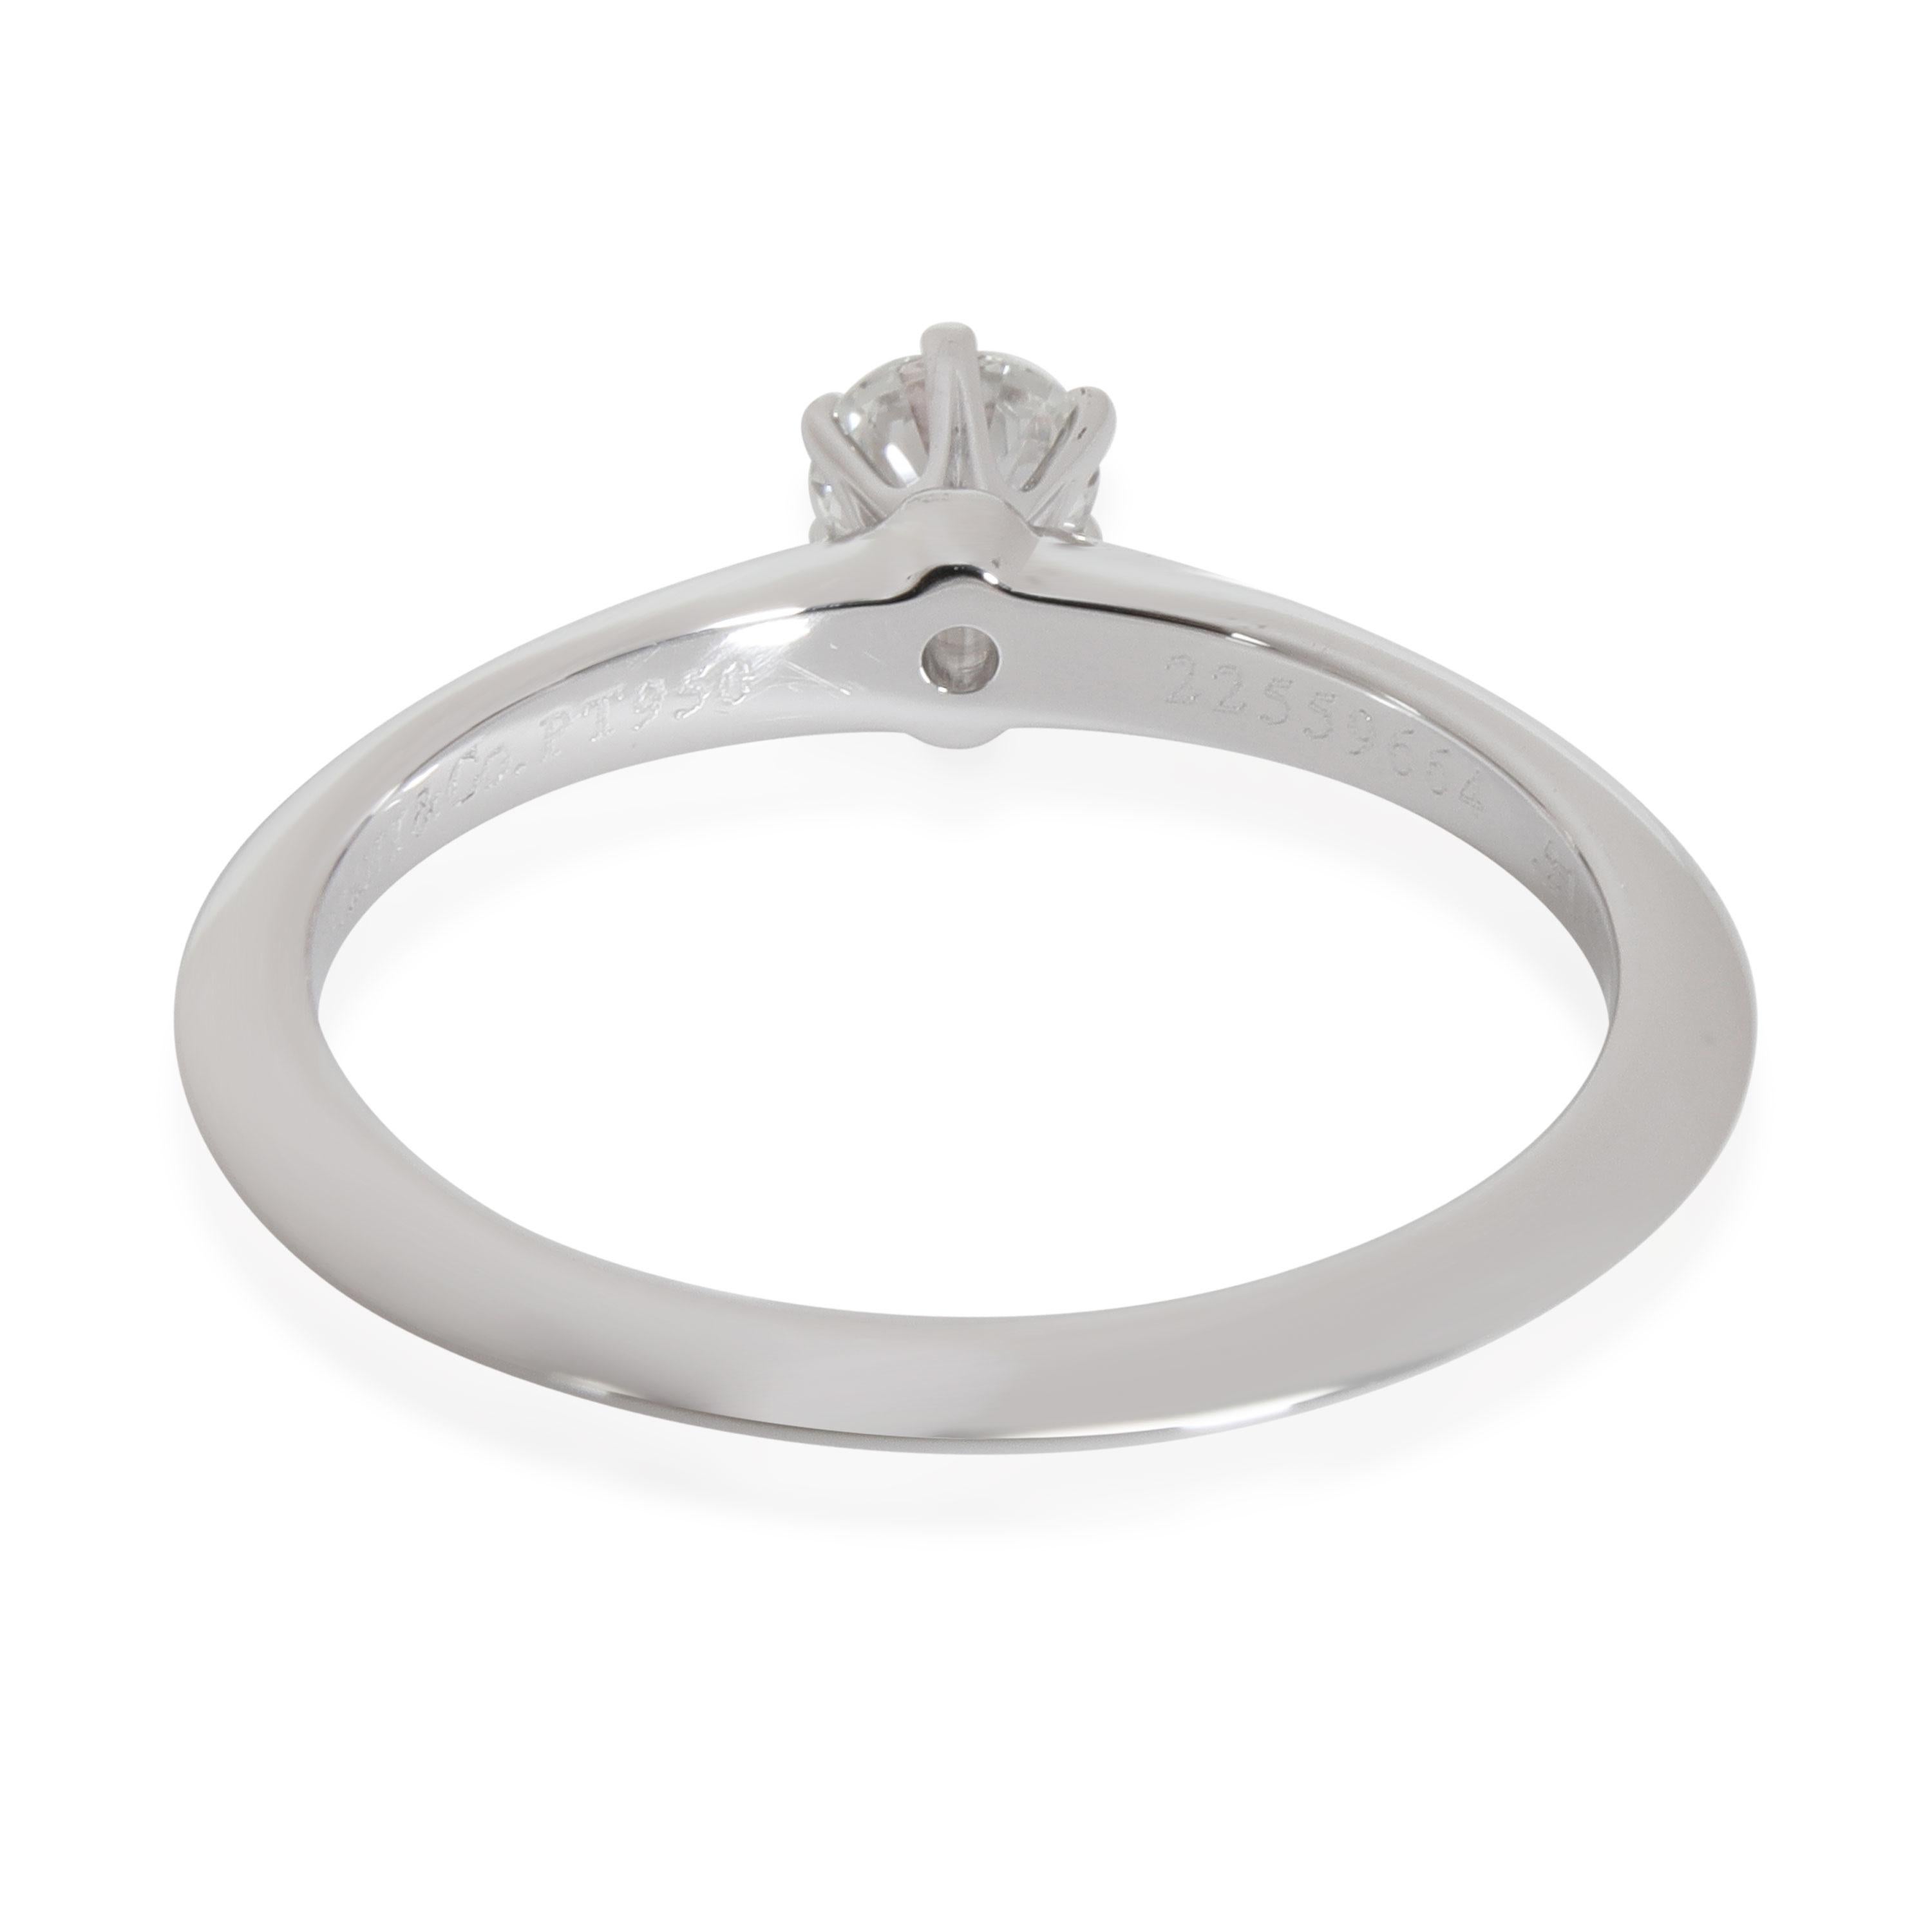 Tiffany & Co. Diamond Solitaire Engagement Ring in Platinum G IF 0.21 CTW

PRIMARY DETAILS
SKU: 114884
Listing Title: Tiffany & Co. Diamond Solitaire Engagement Ring in Platinum G IF 0.21 CTW
Condition Description: Retails for 2250 USD. In excellent